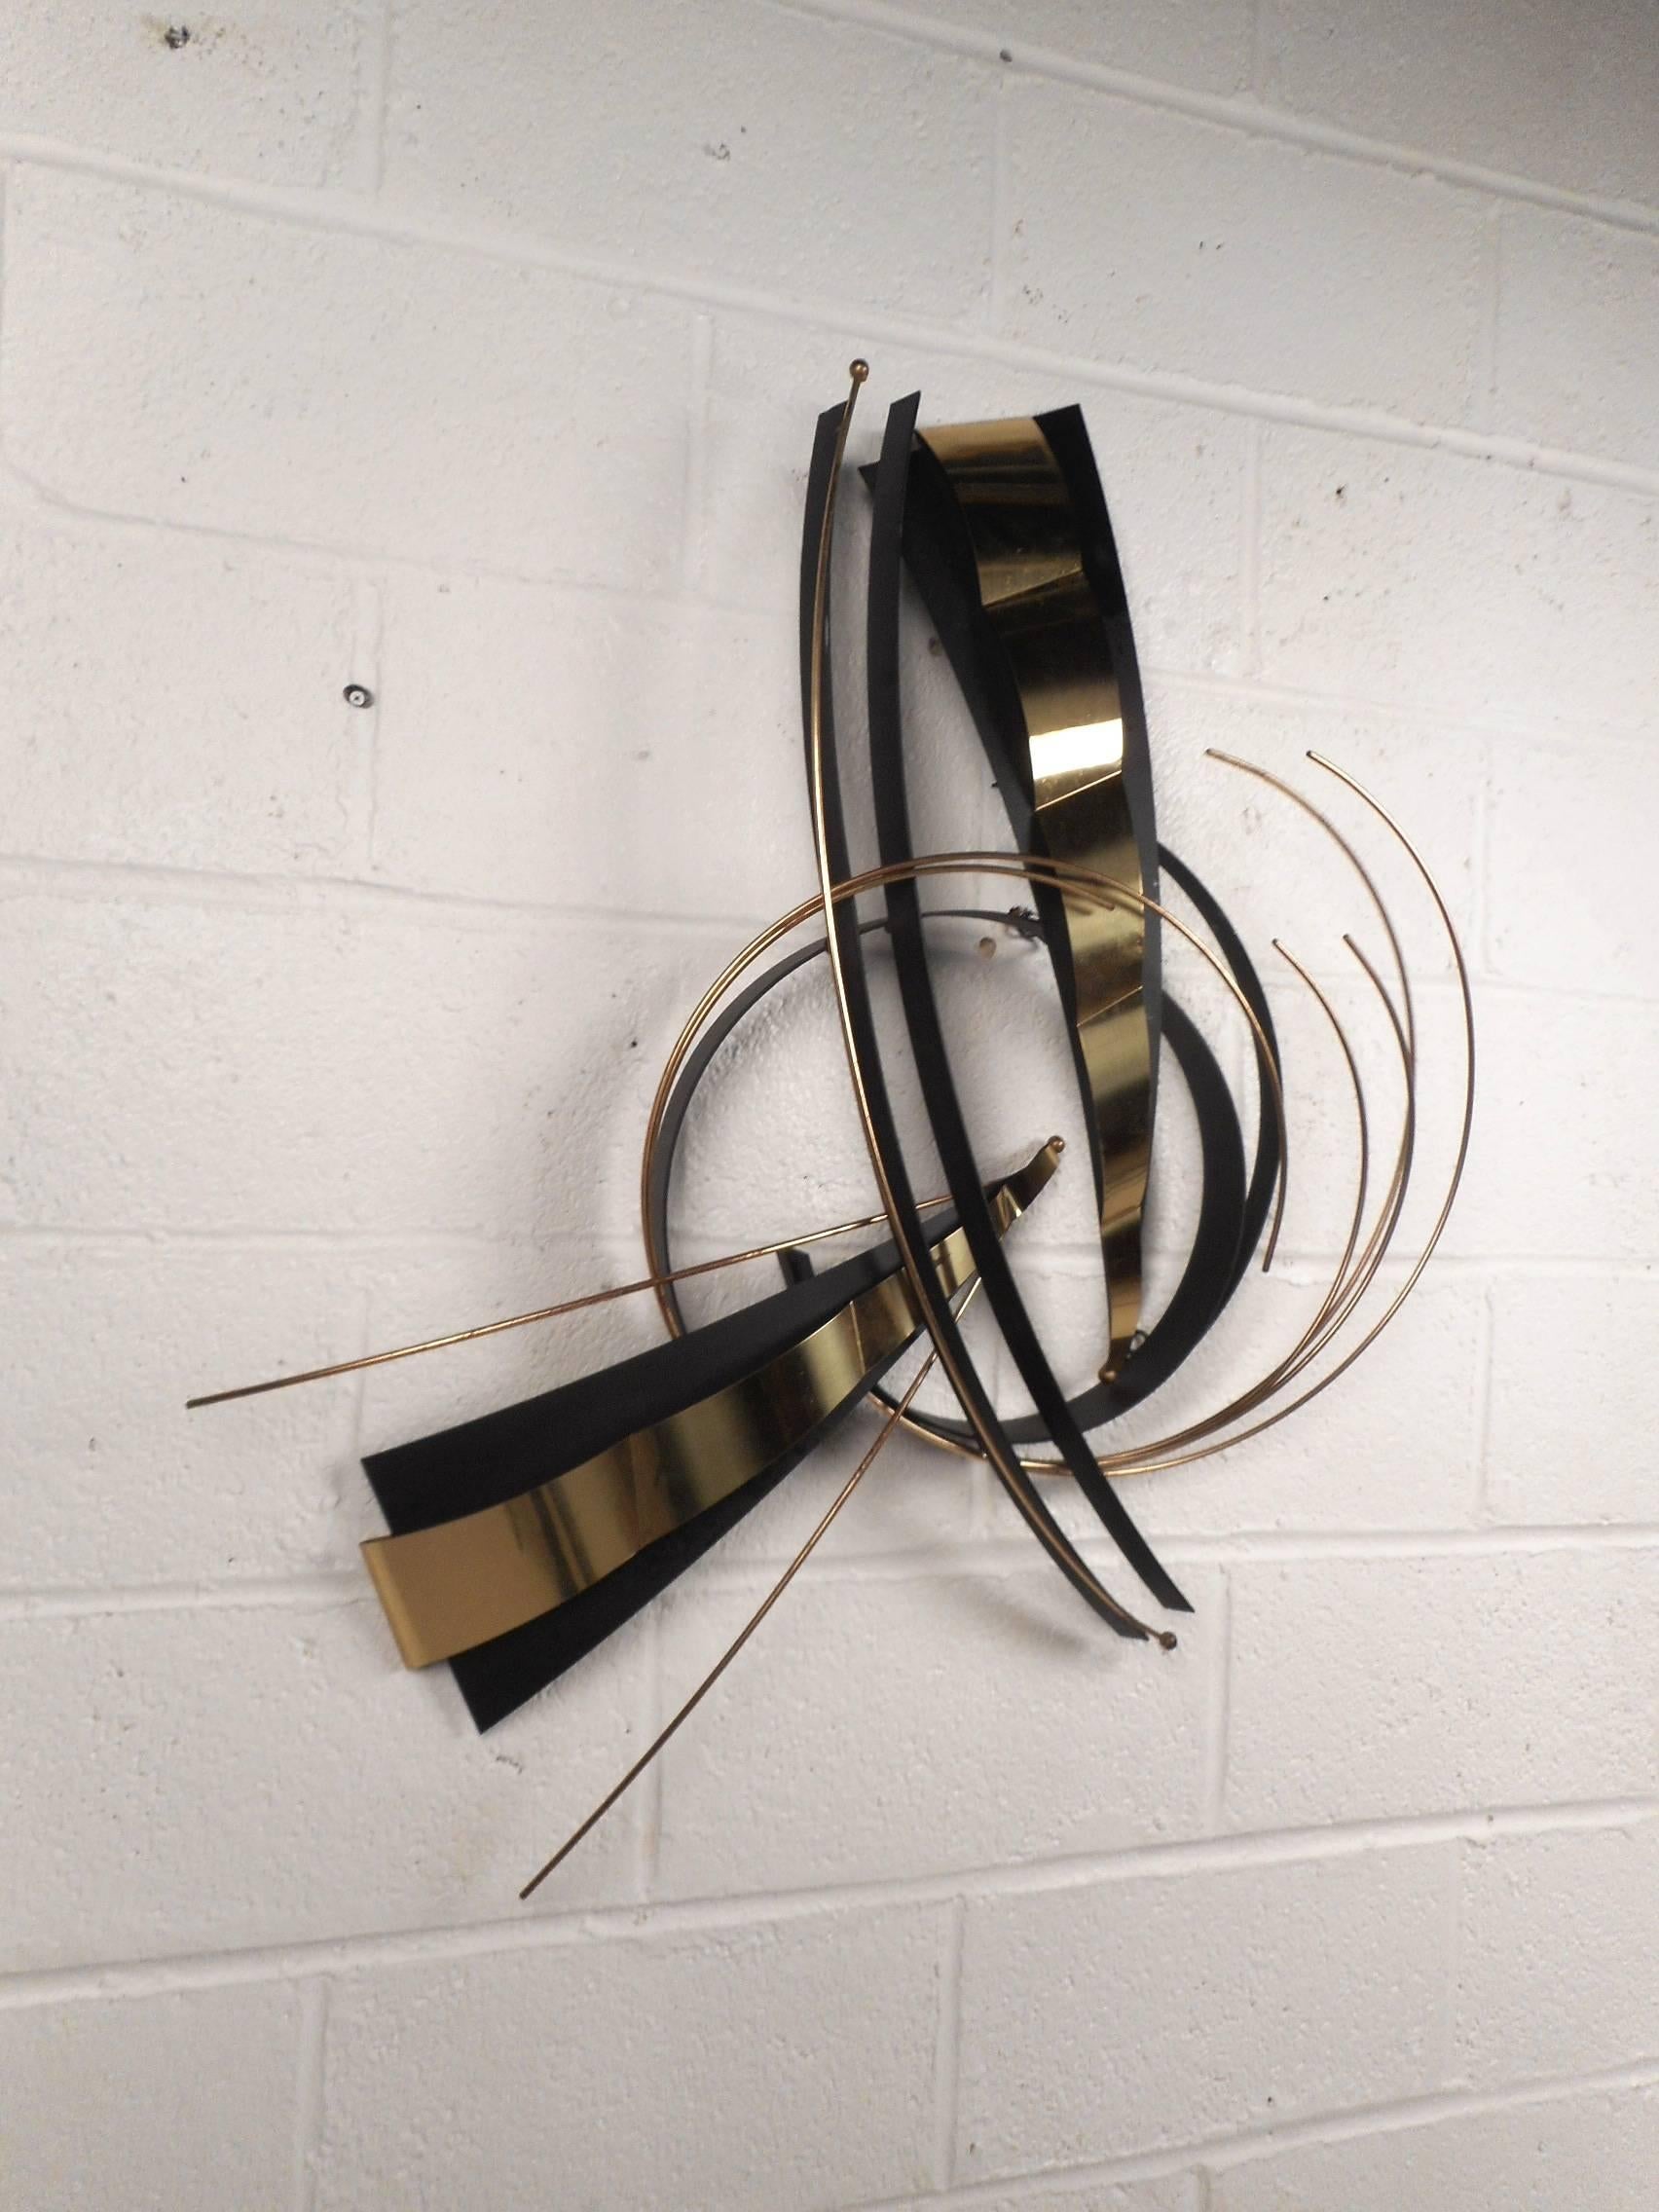 This beautiful Mid-Century Modern wall art is made of metal. Two-tone design with gold and black colored metals. Elegant piece with various shapes and sizes running in different directions adding to the allure. This fabulous vintage modern wall art